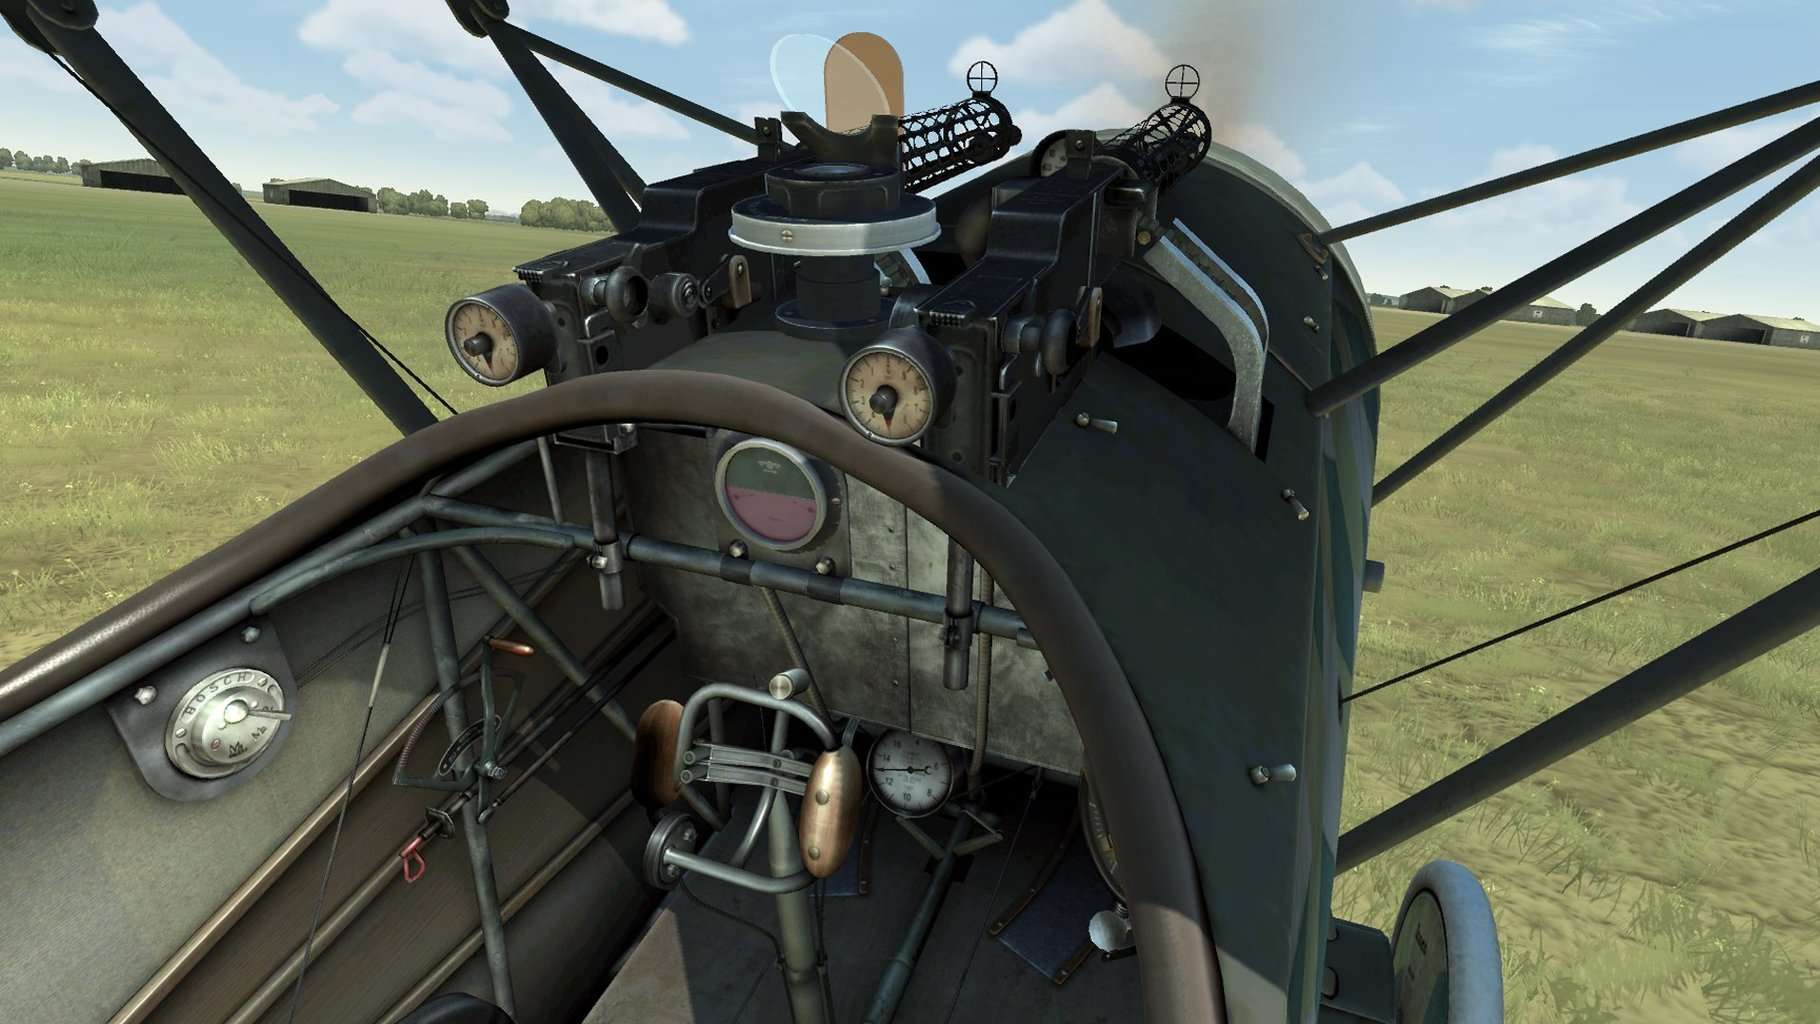 Have a look at 5 of the best flight simulator games for PC ...